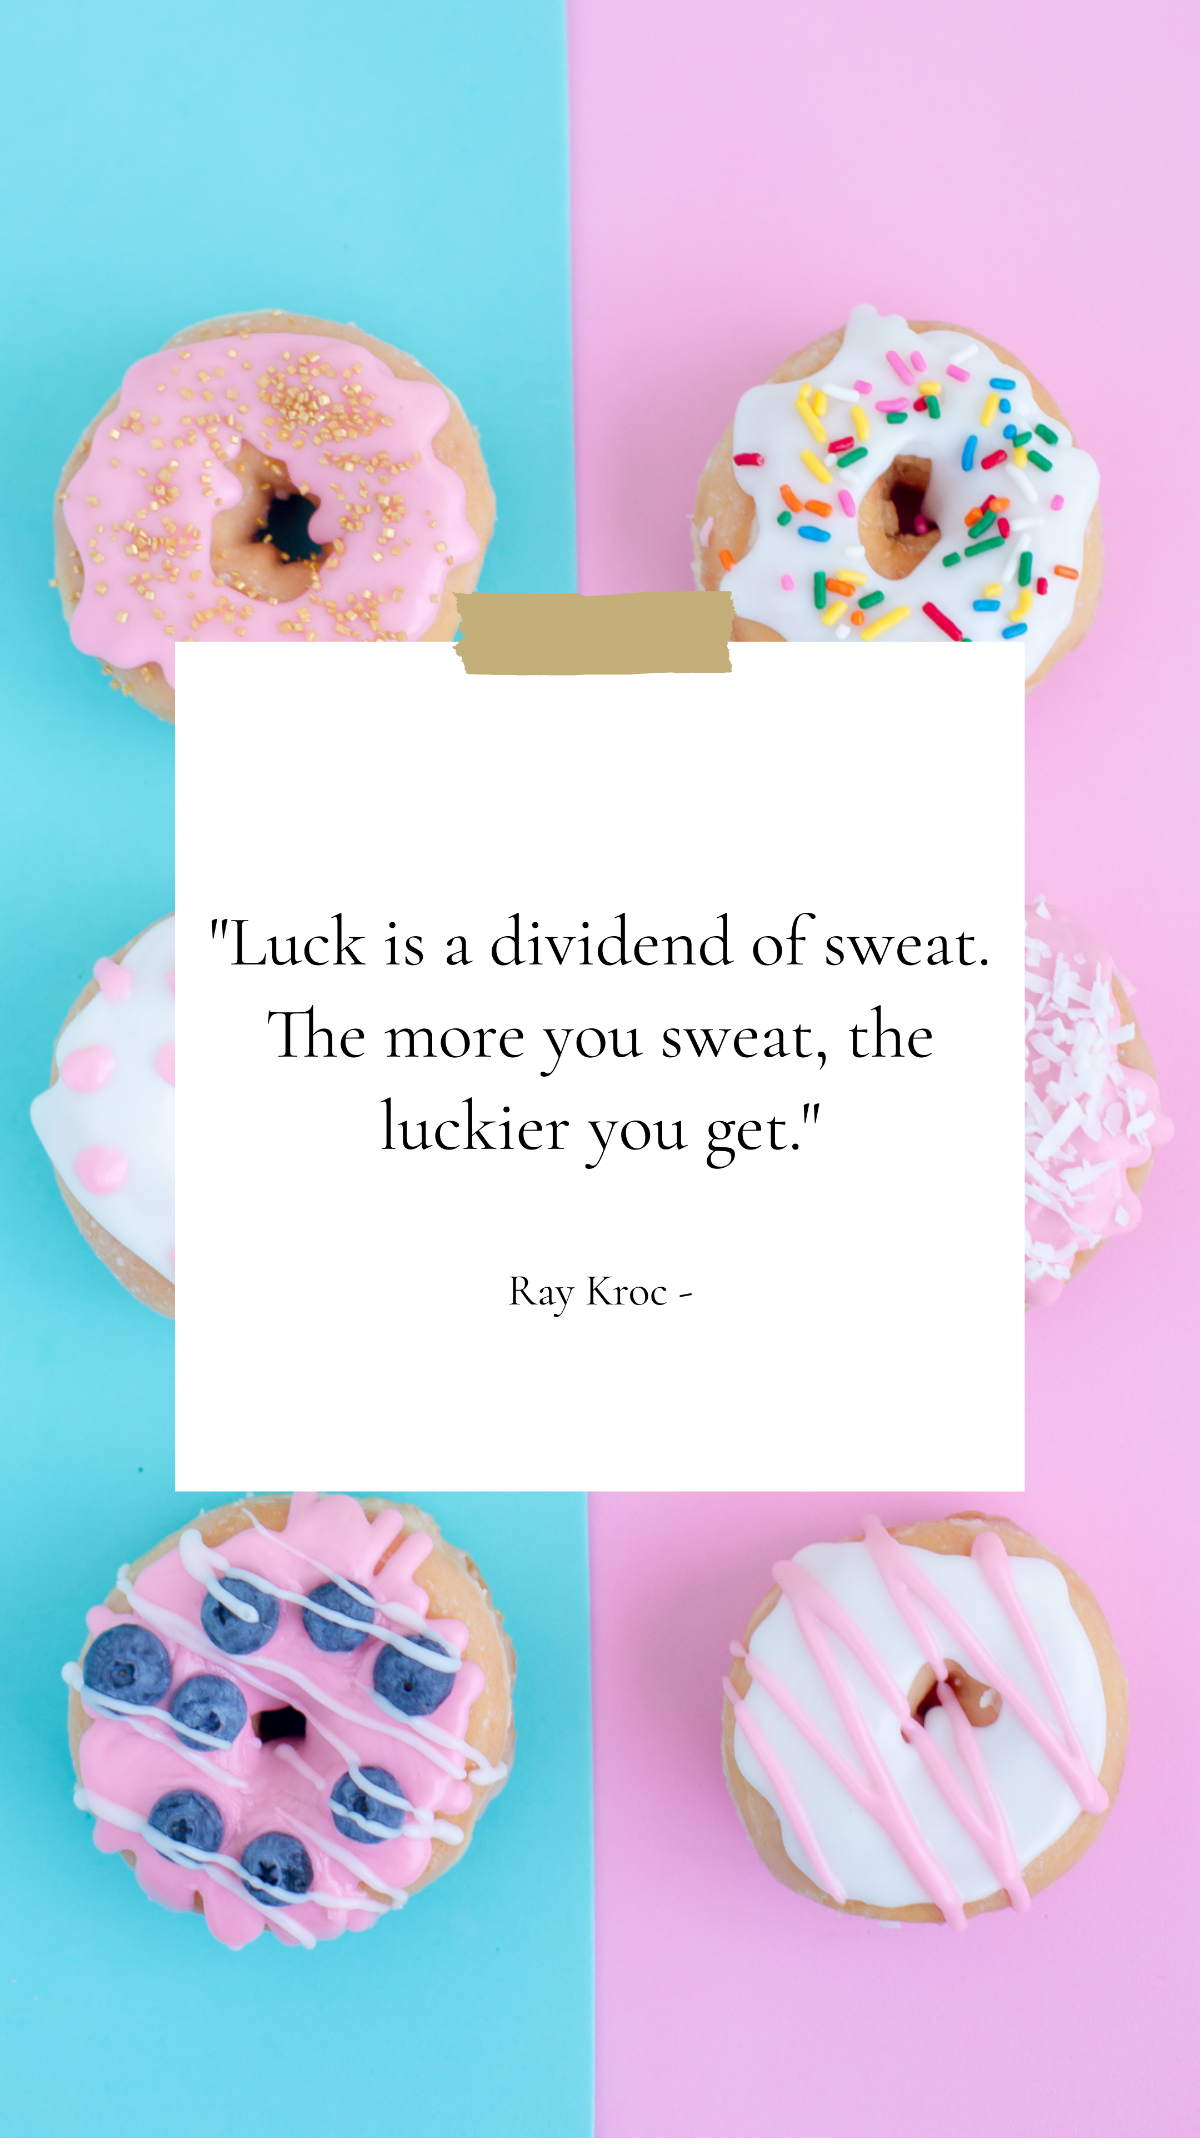 Ray Kroc - Luck is a dividend of sweat. The more you sweat, the luckier you get. Template